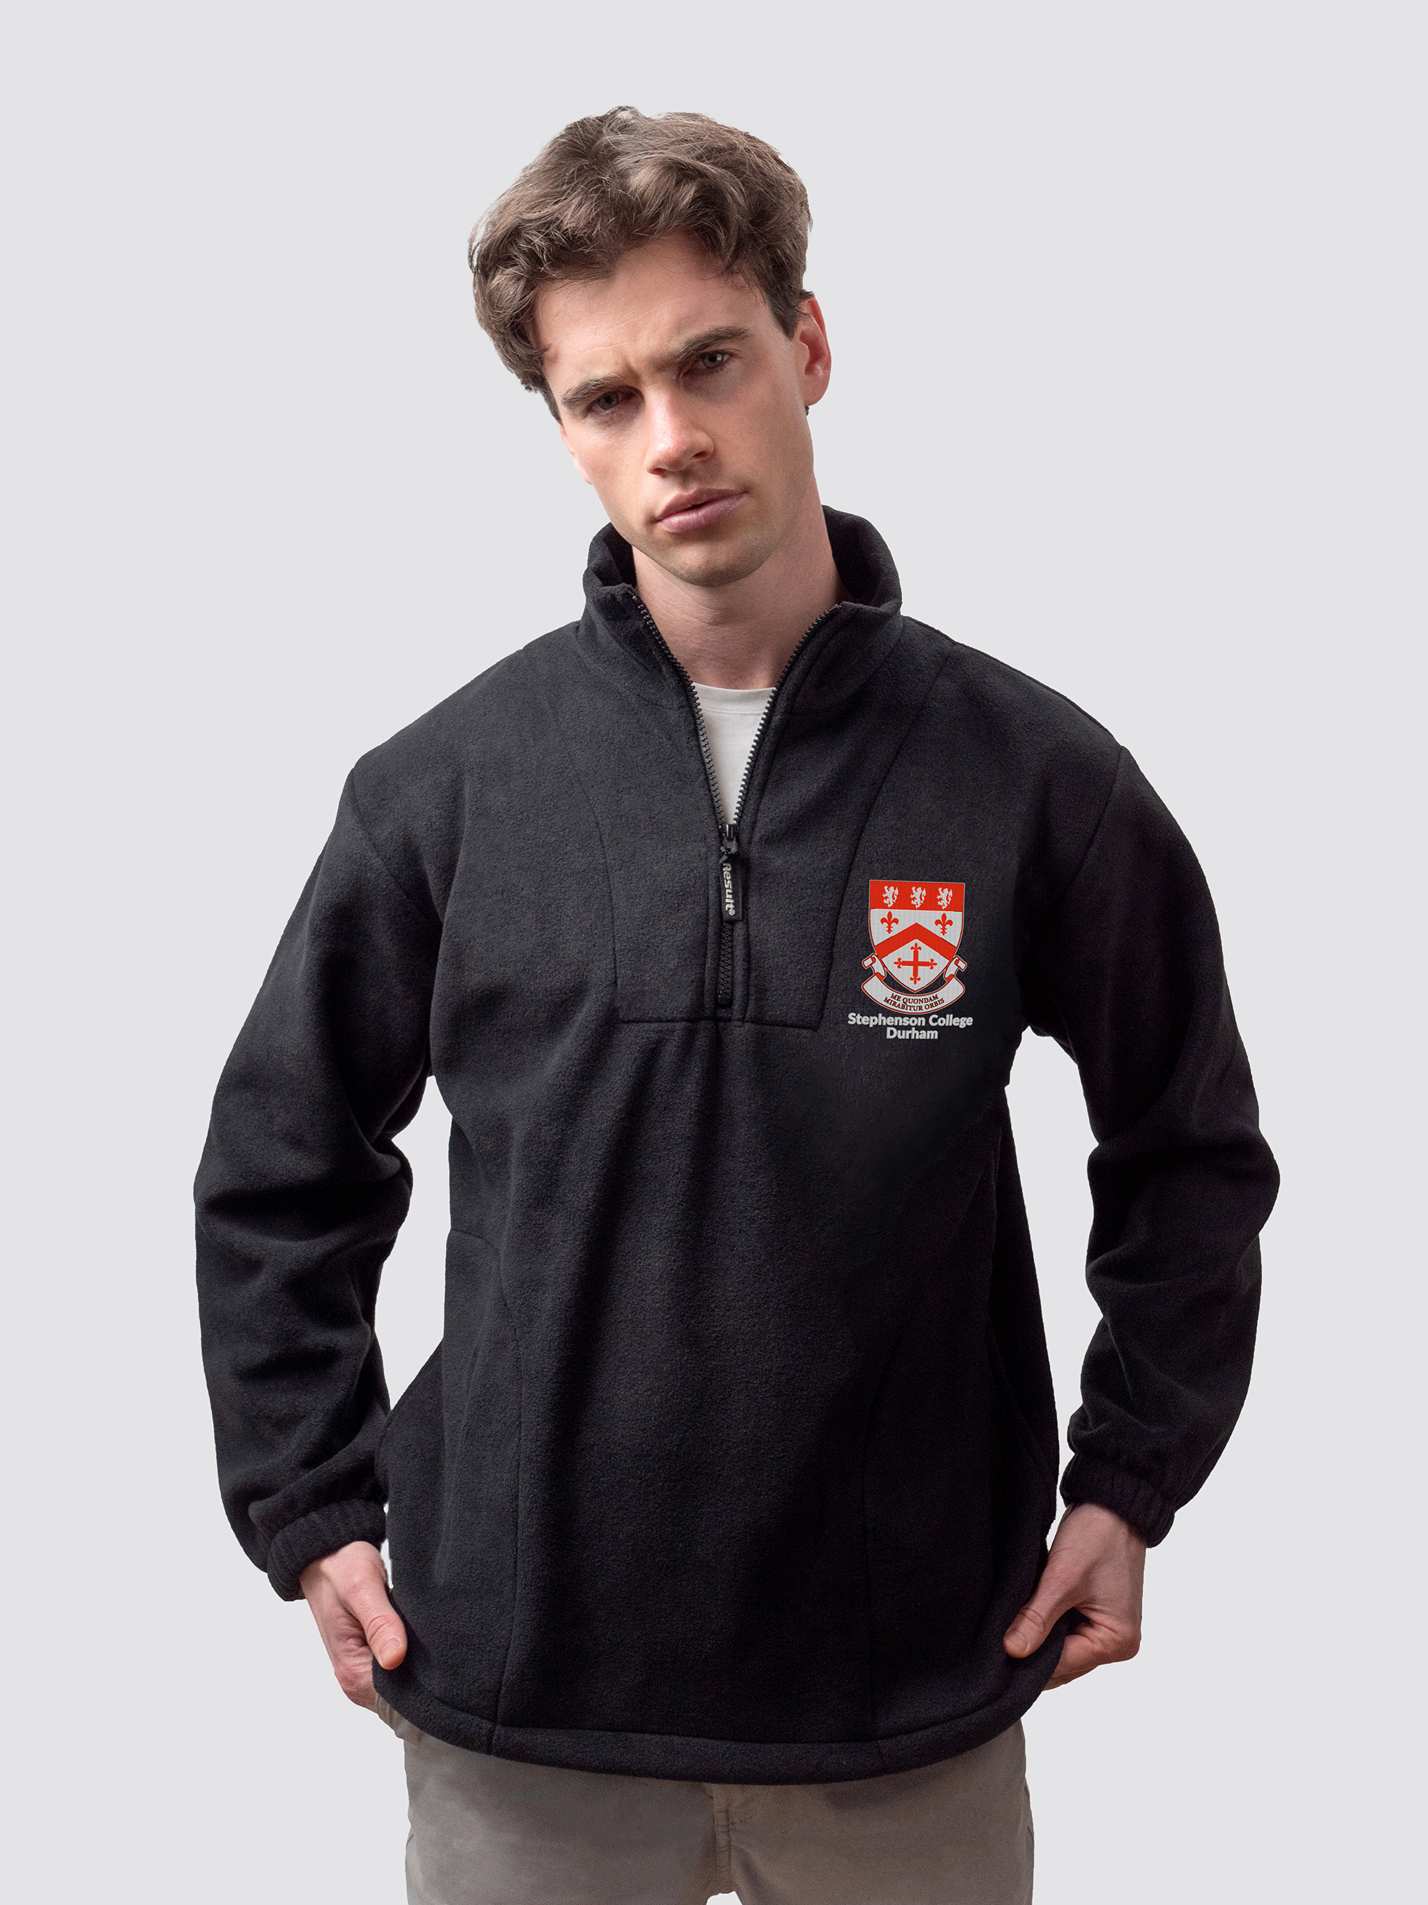 Durham university fleece, with custom embroidered initials and Stephenson crest